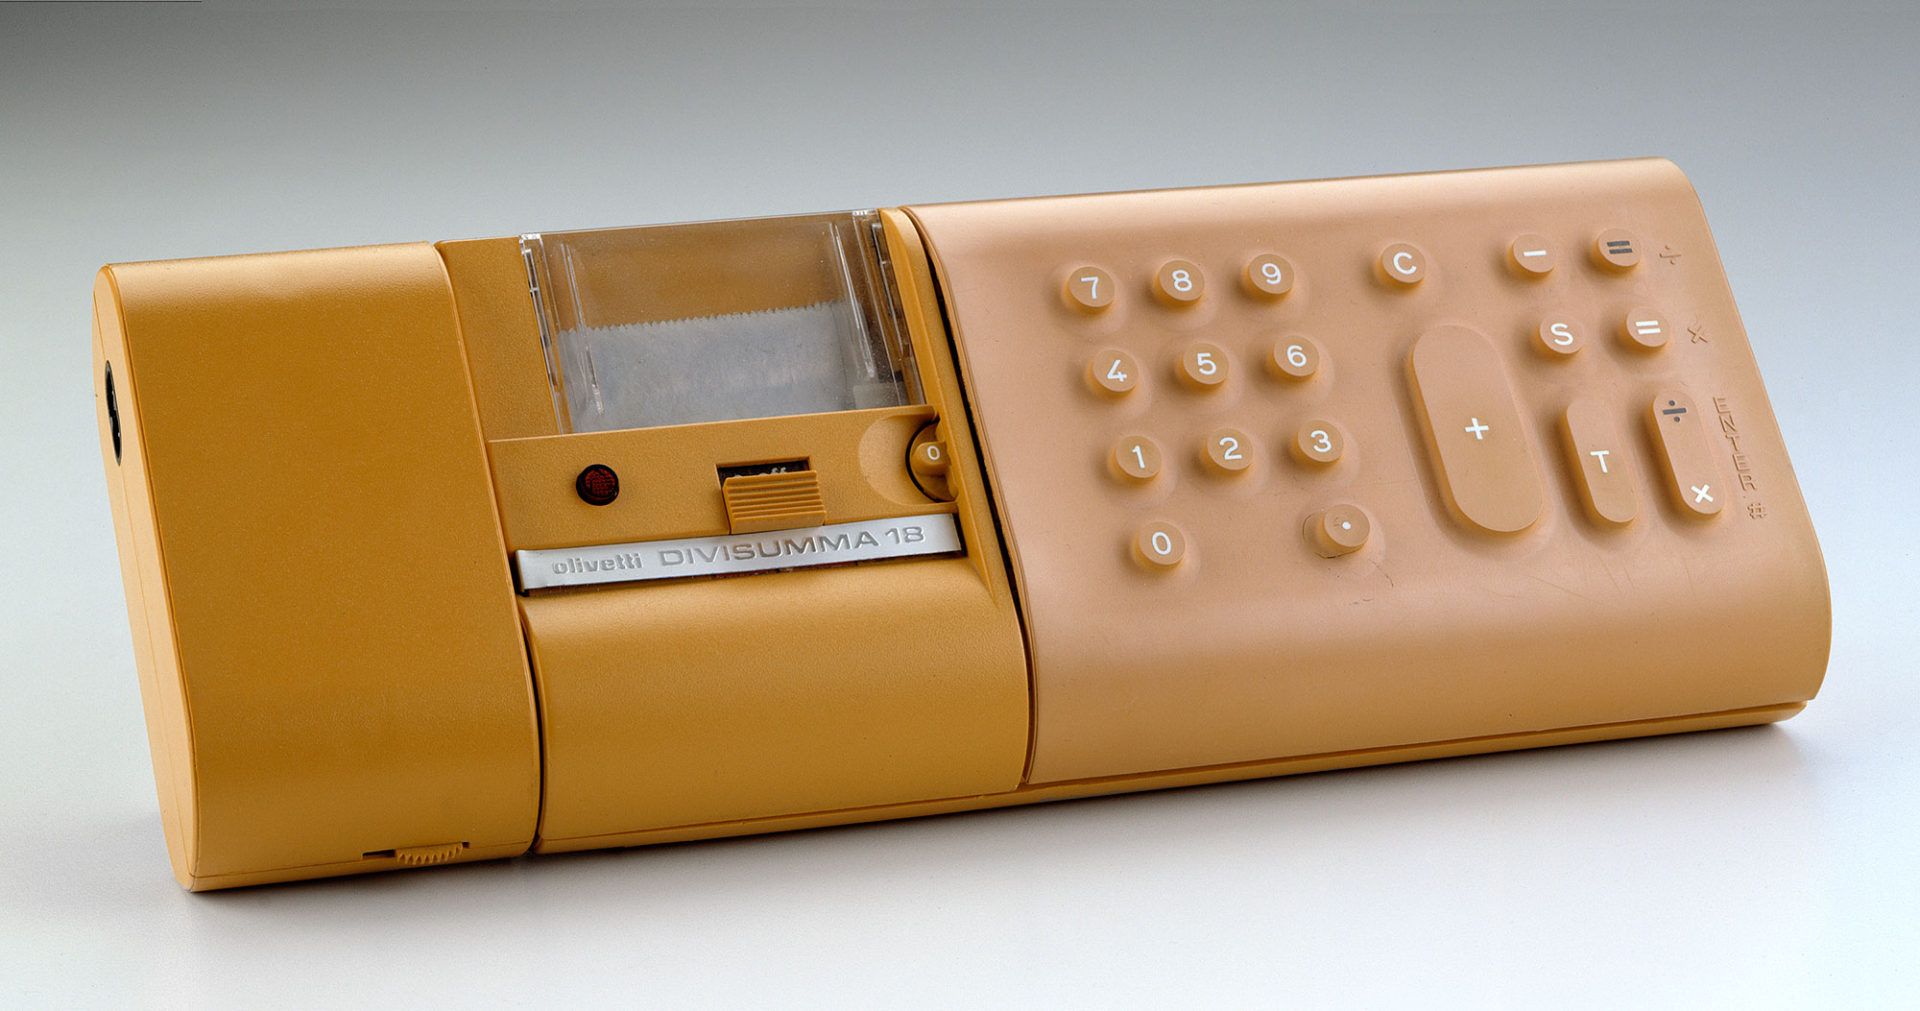 Horizontal rectangular calculator with rounded corners in yellow plastic and rubber. Buttons on right and printer section at center.